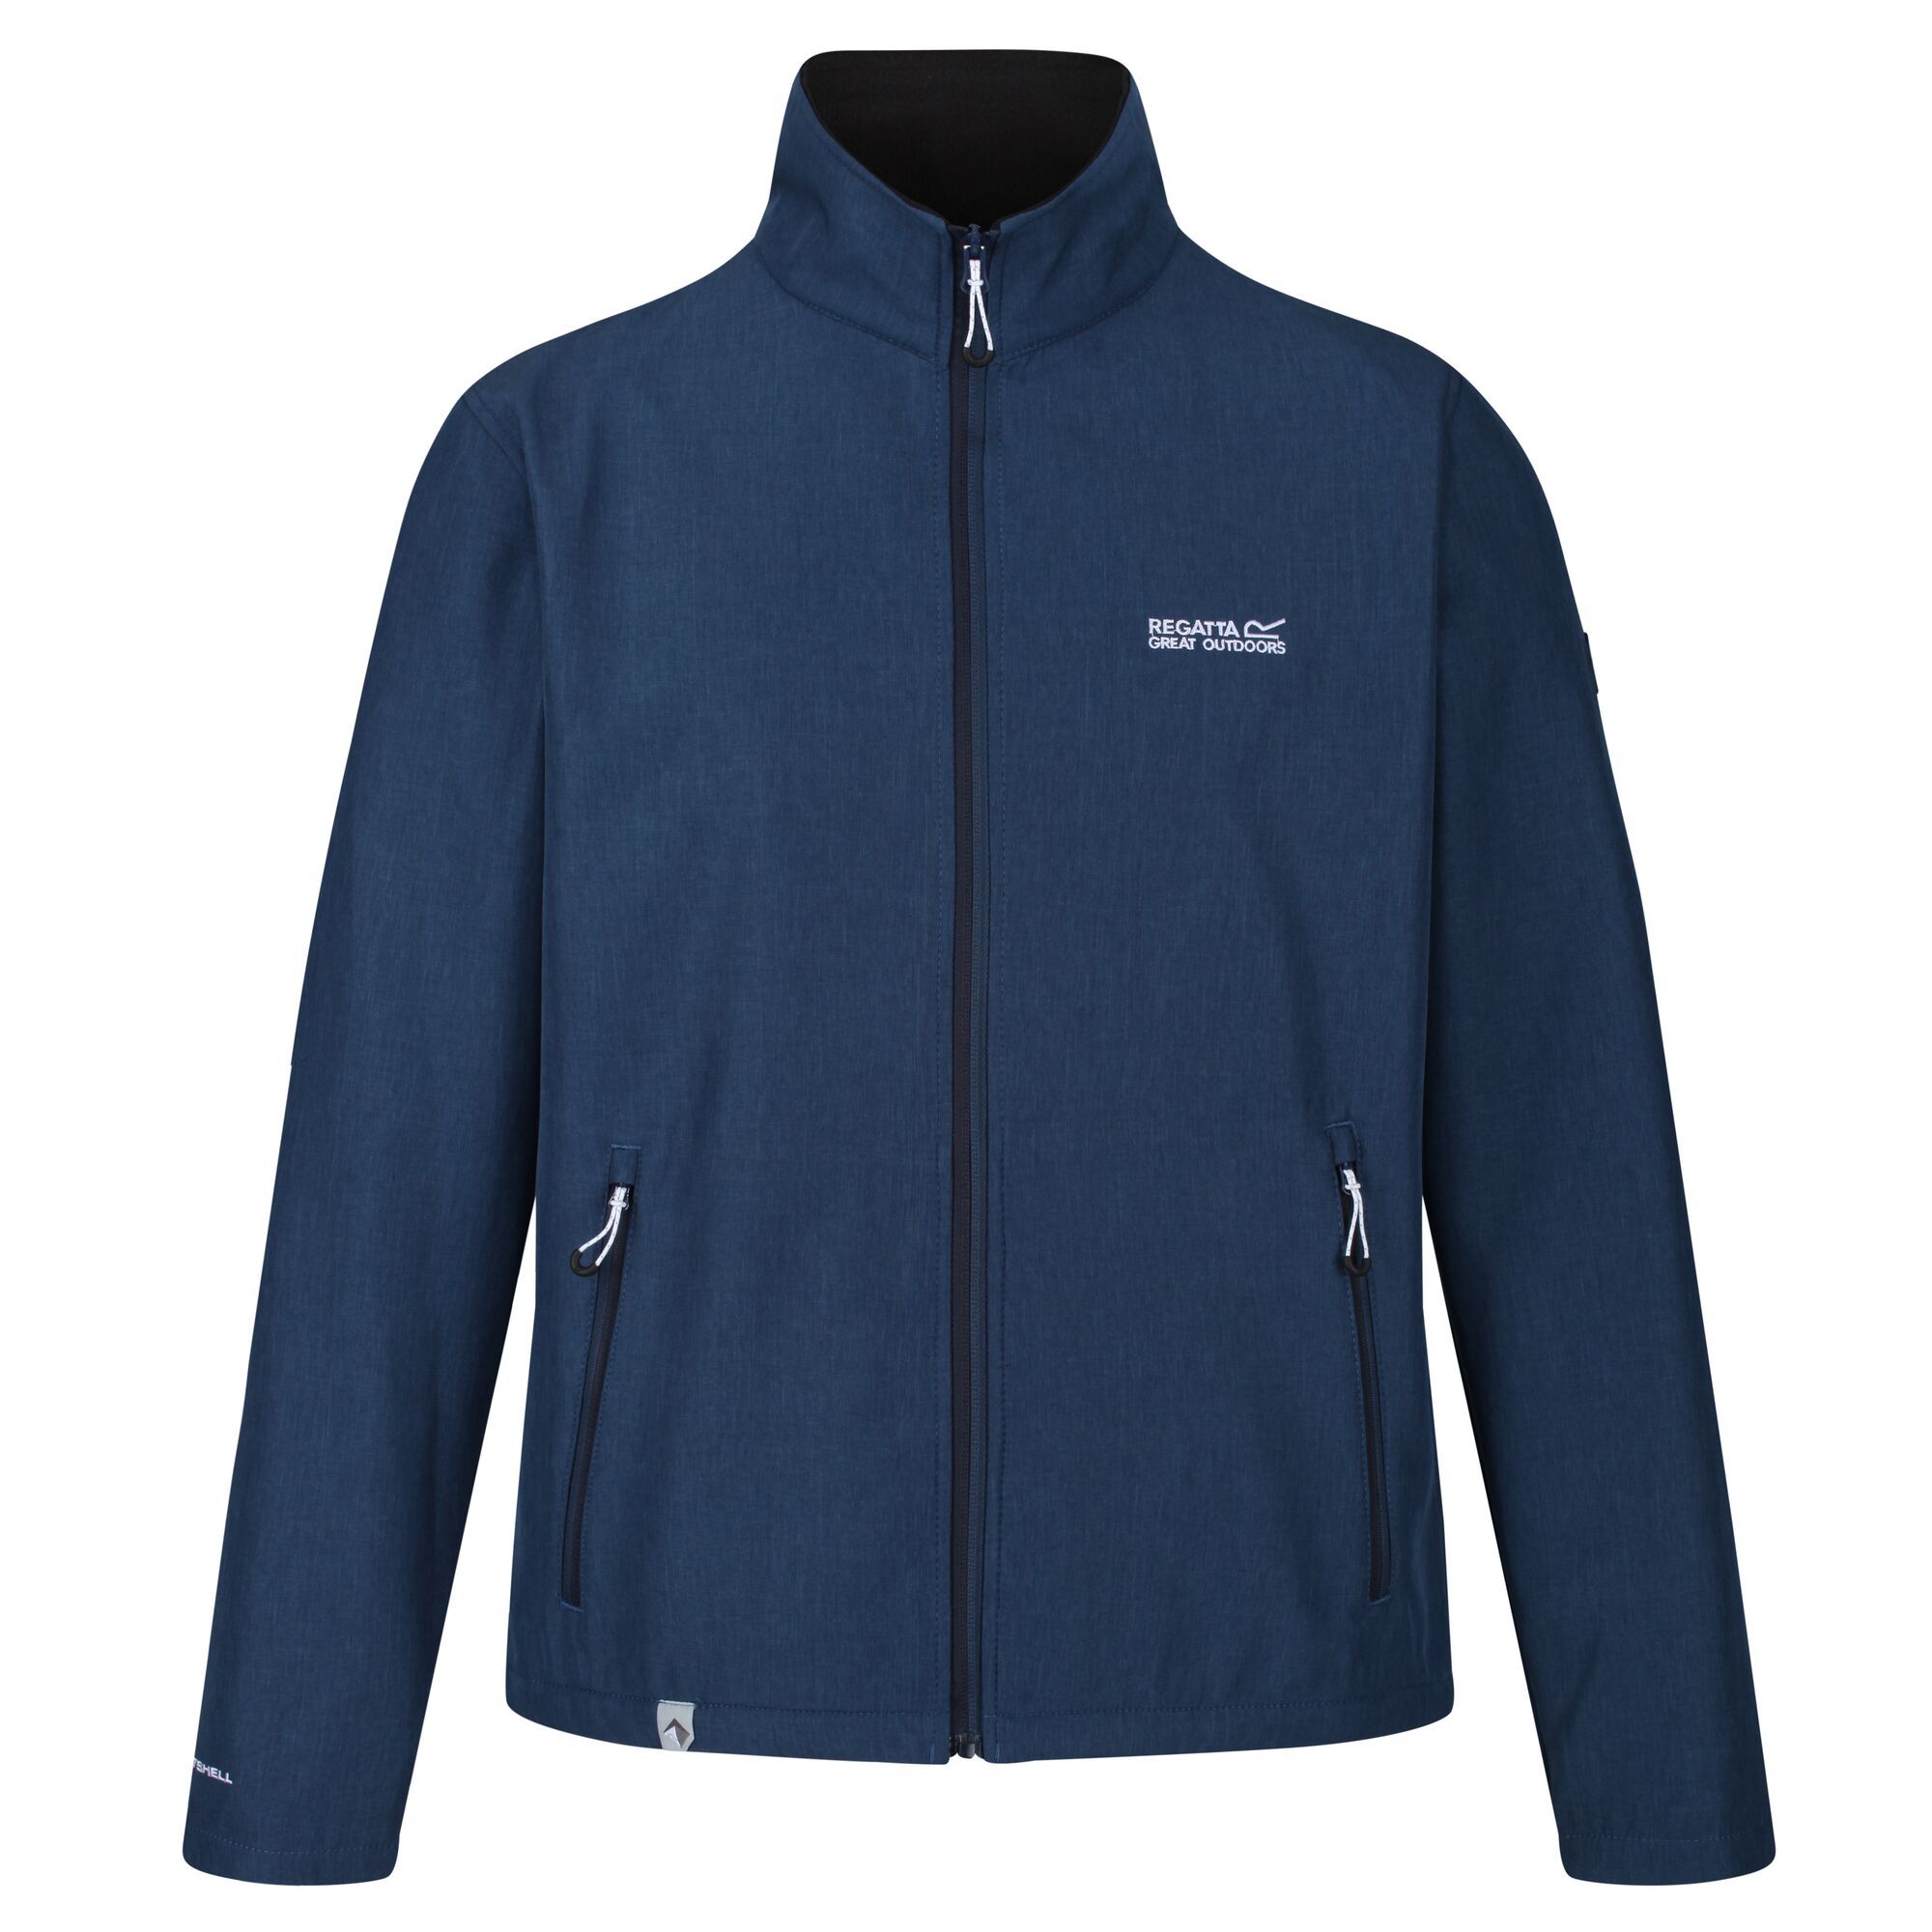 Material: 96% polyester & 4% elastane. Warm backed woven stretch softshell fabric. Durable water repellent finish. Wind resistant. 2 zipped lower pockets. Adjustable shockcord hem.